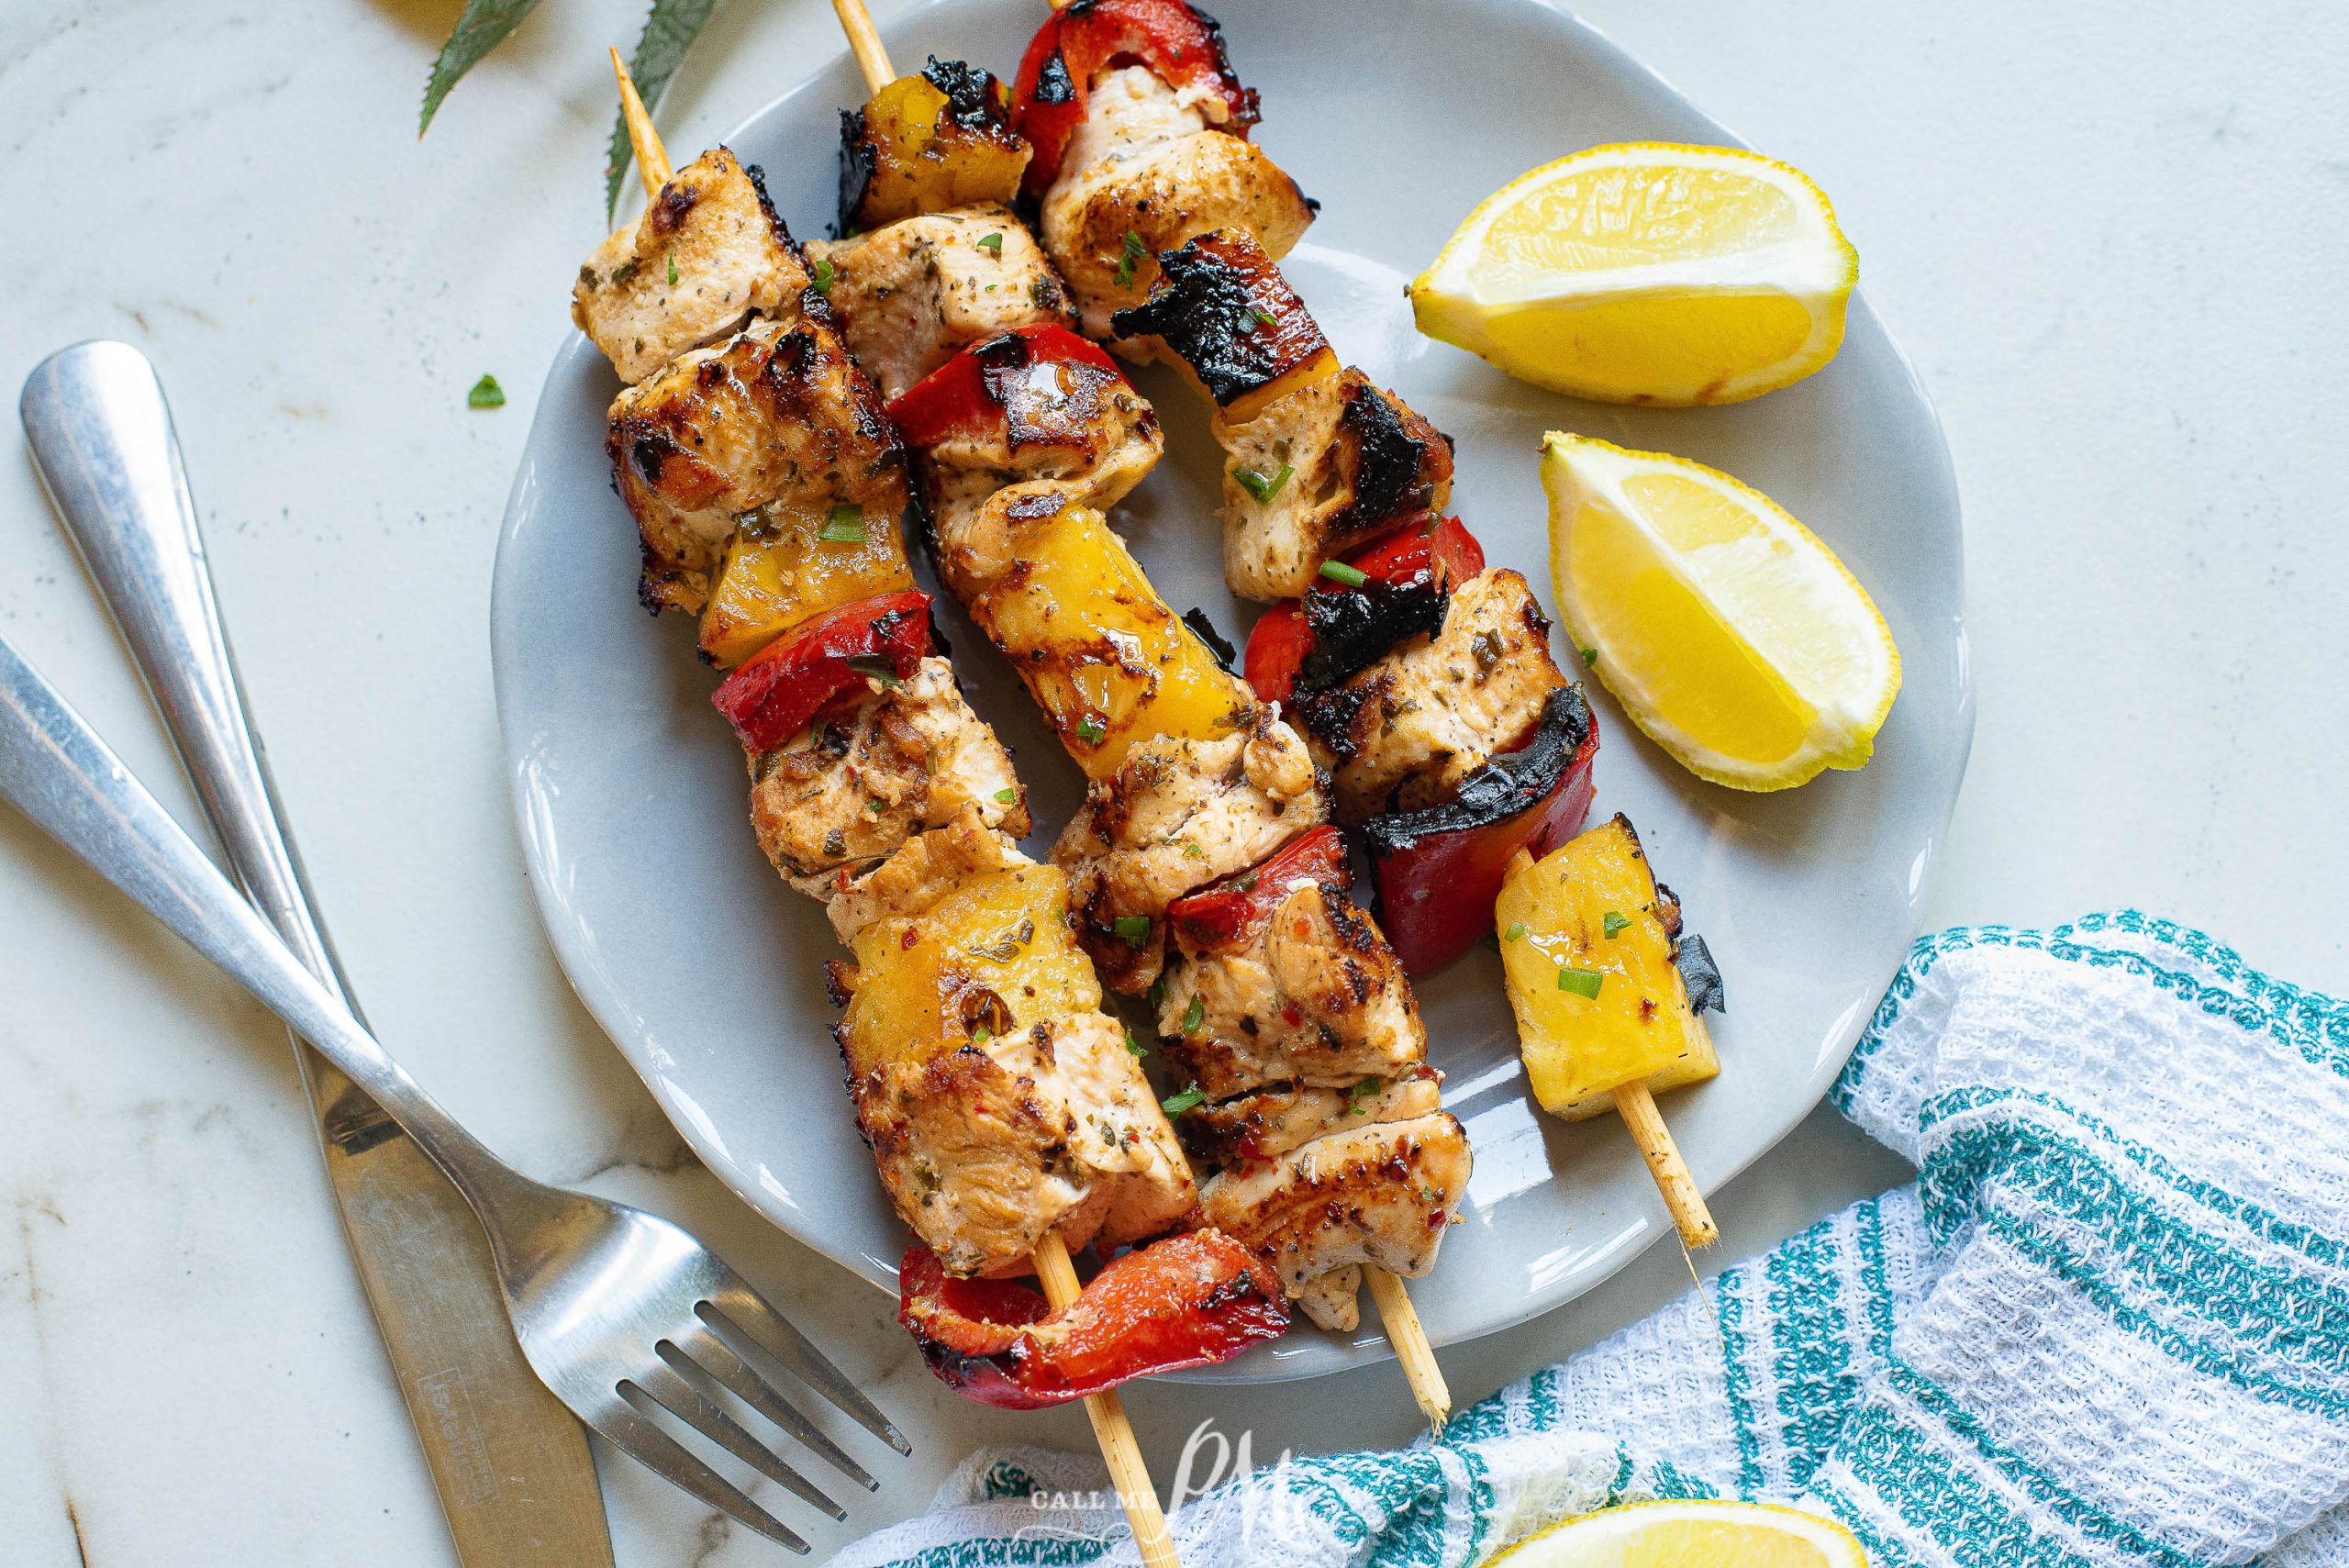 Pineapple chunks, peppers, and Chicken on Kabobs on a blue plate.